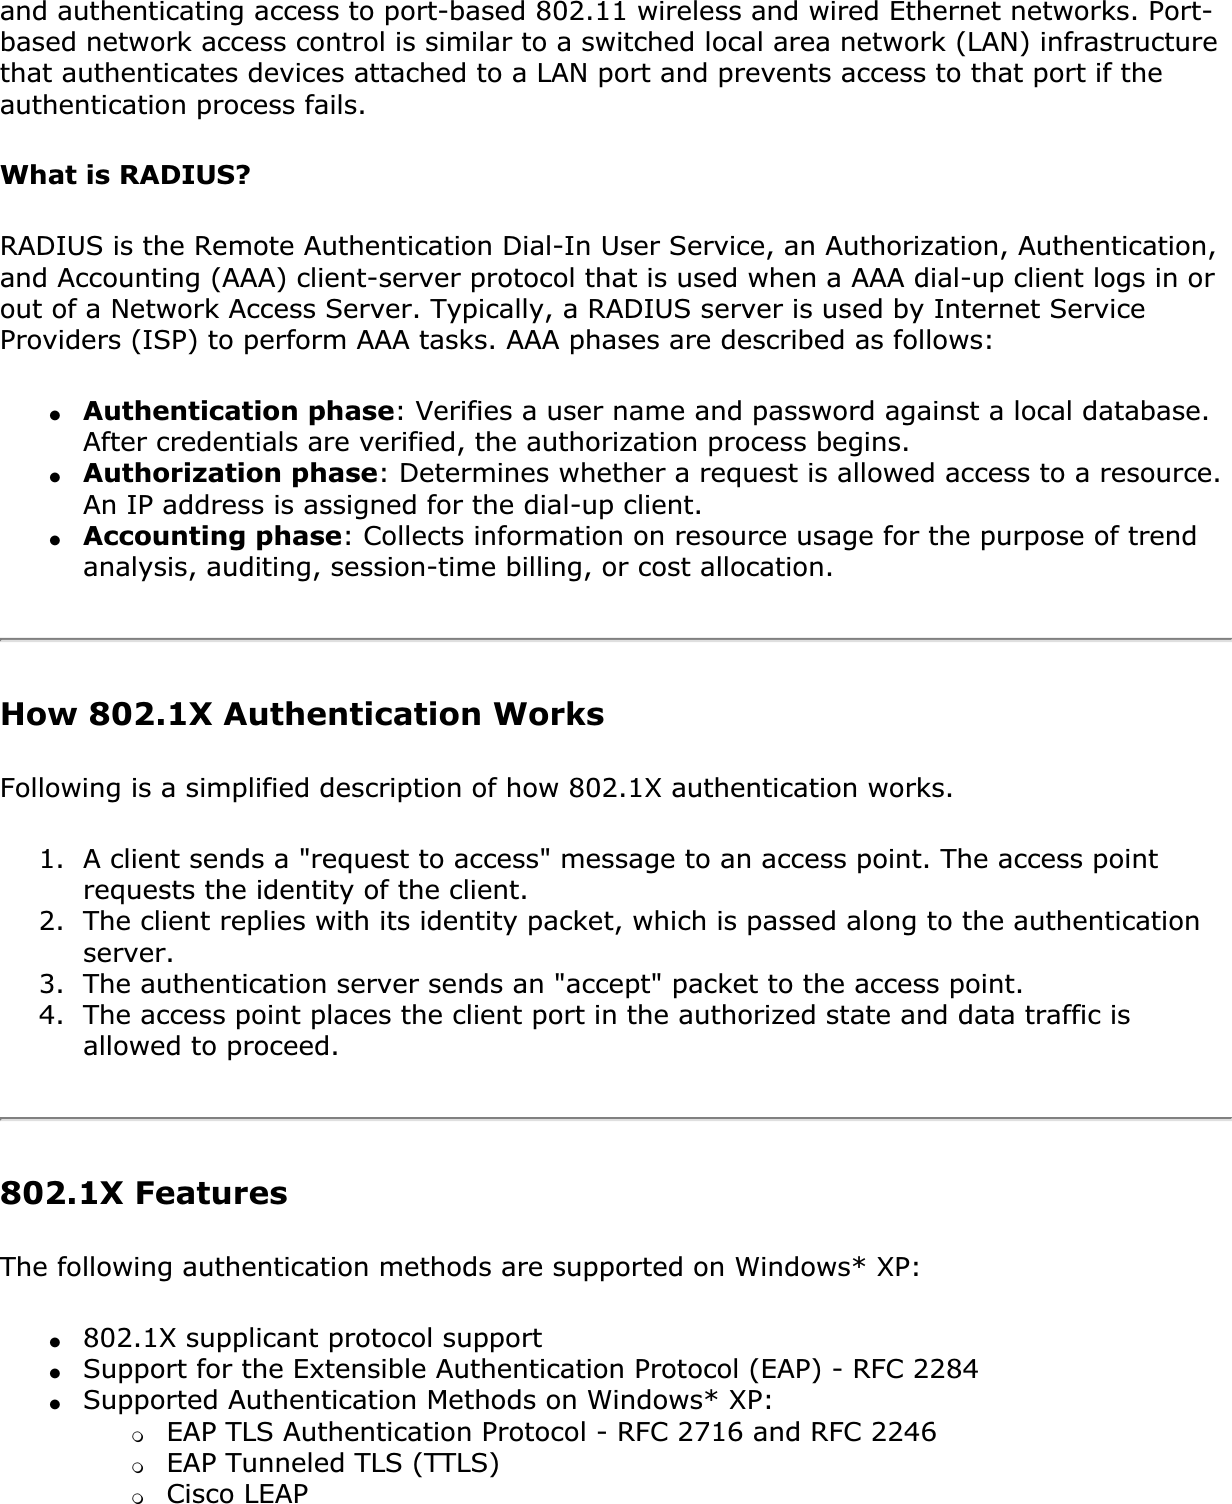 and authenticating access to port-based 802.11 wireless and wired Ethernet networks. Port-based network access control is similar to a switched local area network (LAN) infrastructure that authenticates devices attached to a LAN port and prevents access to that port if the authentication process fails.What is RADIUS?RADIUS is the Remote Authentication Dial-In User Service, an Authorization, Authentication, and Accounting (AAA) client-server protocol that is used when a AAA dial-up client logs in or out of a Network Access Server. Typically, a RADIUS server is used by Internet Service Providers (ISP) to perform AAA tasks. AAA phases are described as follows:●Authentication phase: Verifies a user name and password against a local database. After credentials are verified, the authorization process begins.●Authorization phase: Determines whether a request is allowed access to a resource. An IP address is assigned for the dial-up client.●Accounting phase: Collects information on resource usage for the purpose of trend analysis, auditing, session-time billing, or cost allocation.How 802.1X Authentication WorksFollowing is a simplified description of how 802.1X authentication works.1. A client sends a &quot;request to access&quot; message to an access point. The access point requests the identity of the client.2. The client replies with its identity packet, which is passed along to the authentication server.3. The authentication server sends an &quot;accept&quot; packet to the access point.4. The access point places the client port in the authorized state and data traffic is allowed to proceed.802.1X FeaturesThe following authentication methods are supported on Windows* XP:●802.1X supplicant protocol support●Support for the Extensible Authentication Protocol (EAP) - RFC 2284●Supported Authentication Methods on Windows* XP: ❍EAP TLS Authentication Protocol - RFC 2716 and RFC 2246❍EAP Tunneled TLS (TTLS)❍Cisco LEAP